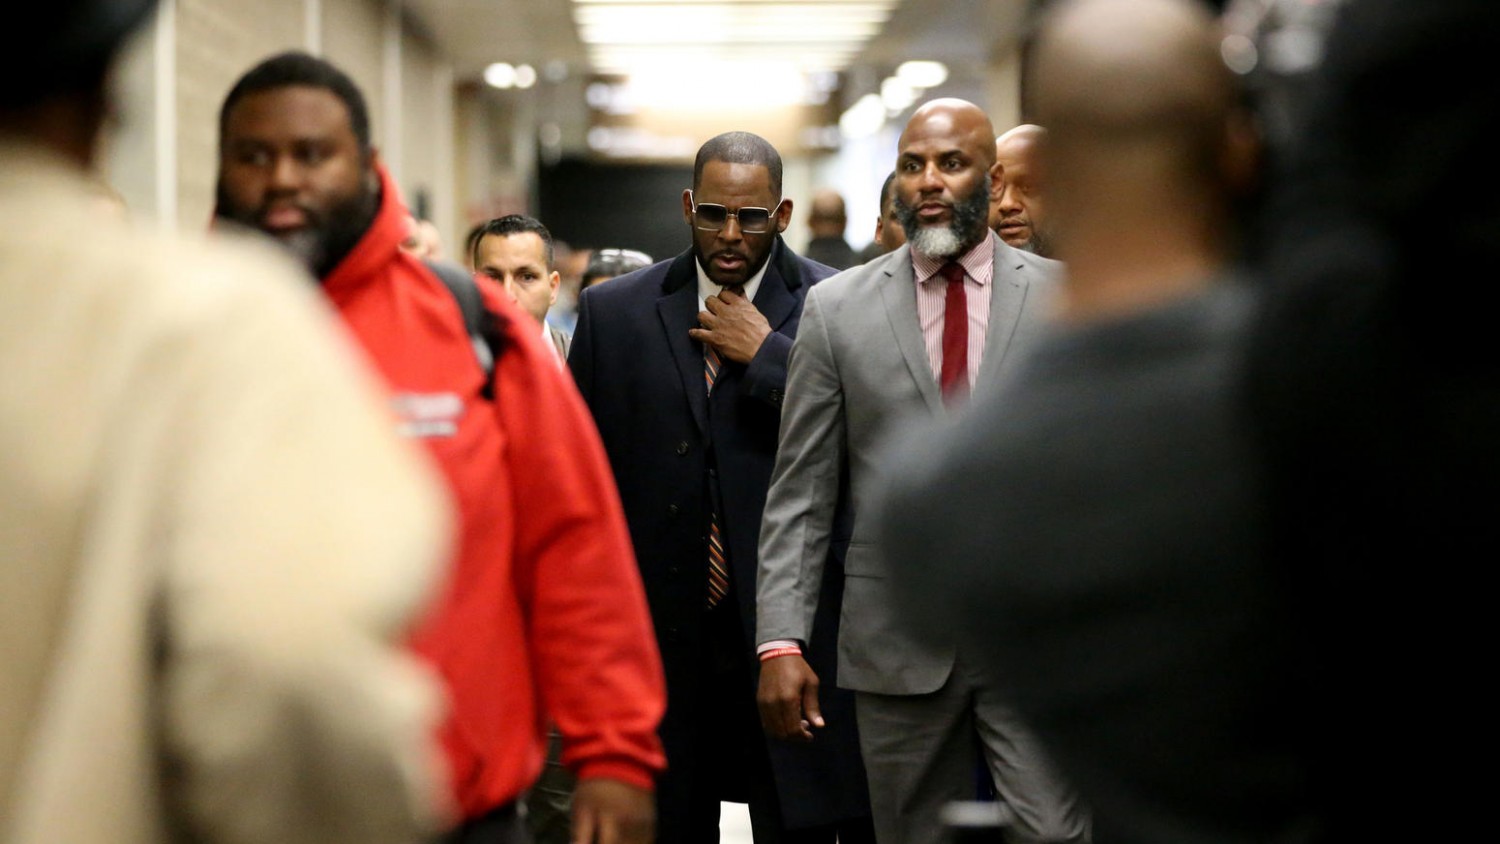 Antonio Perez / Chicago Tribune R. Kelly, center, appears at the Daley Center in Chicago on May 8, 2019, for a hearing in his child support case.